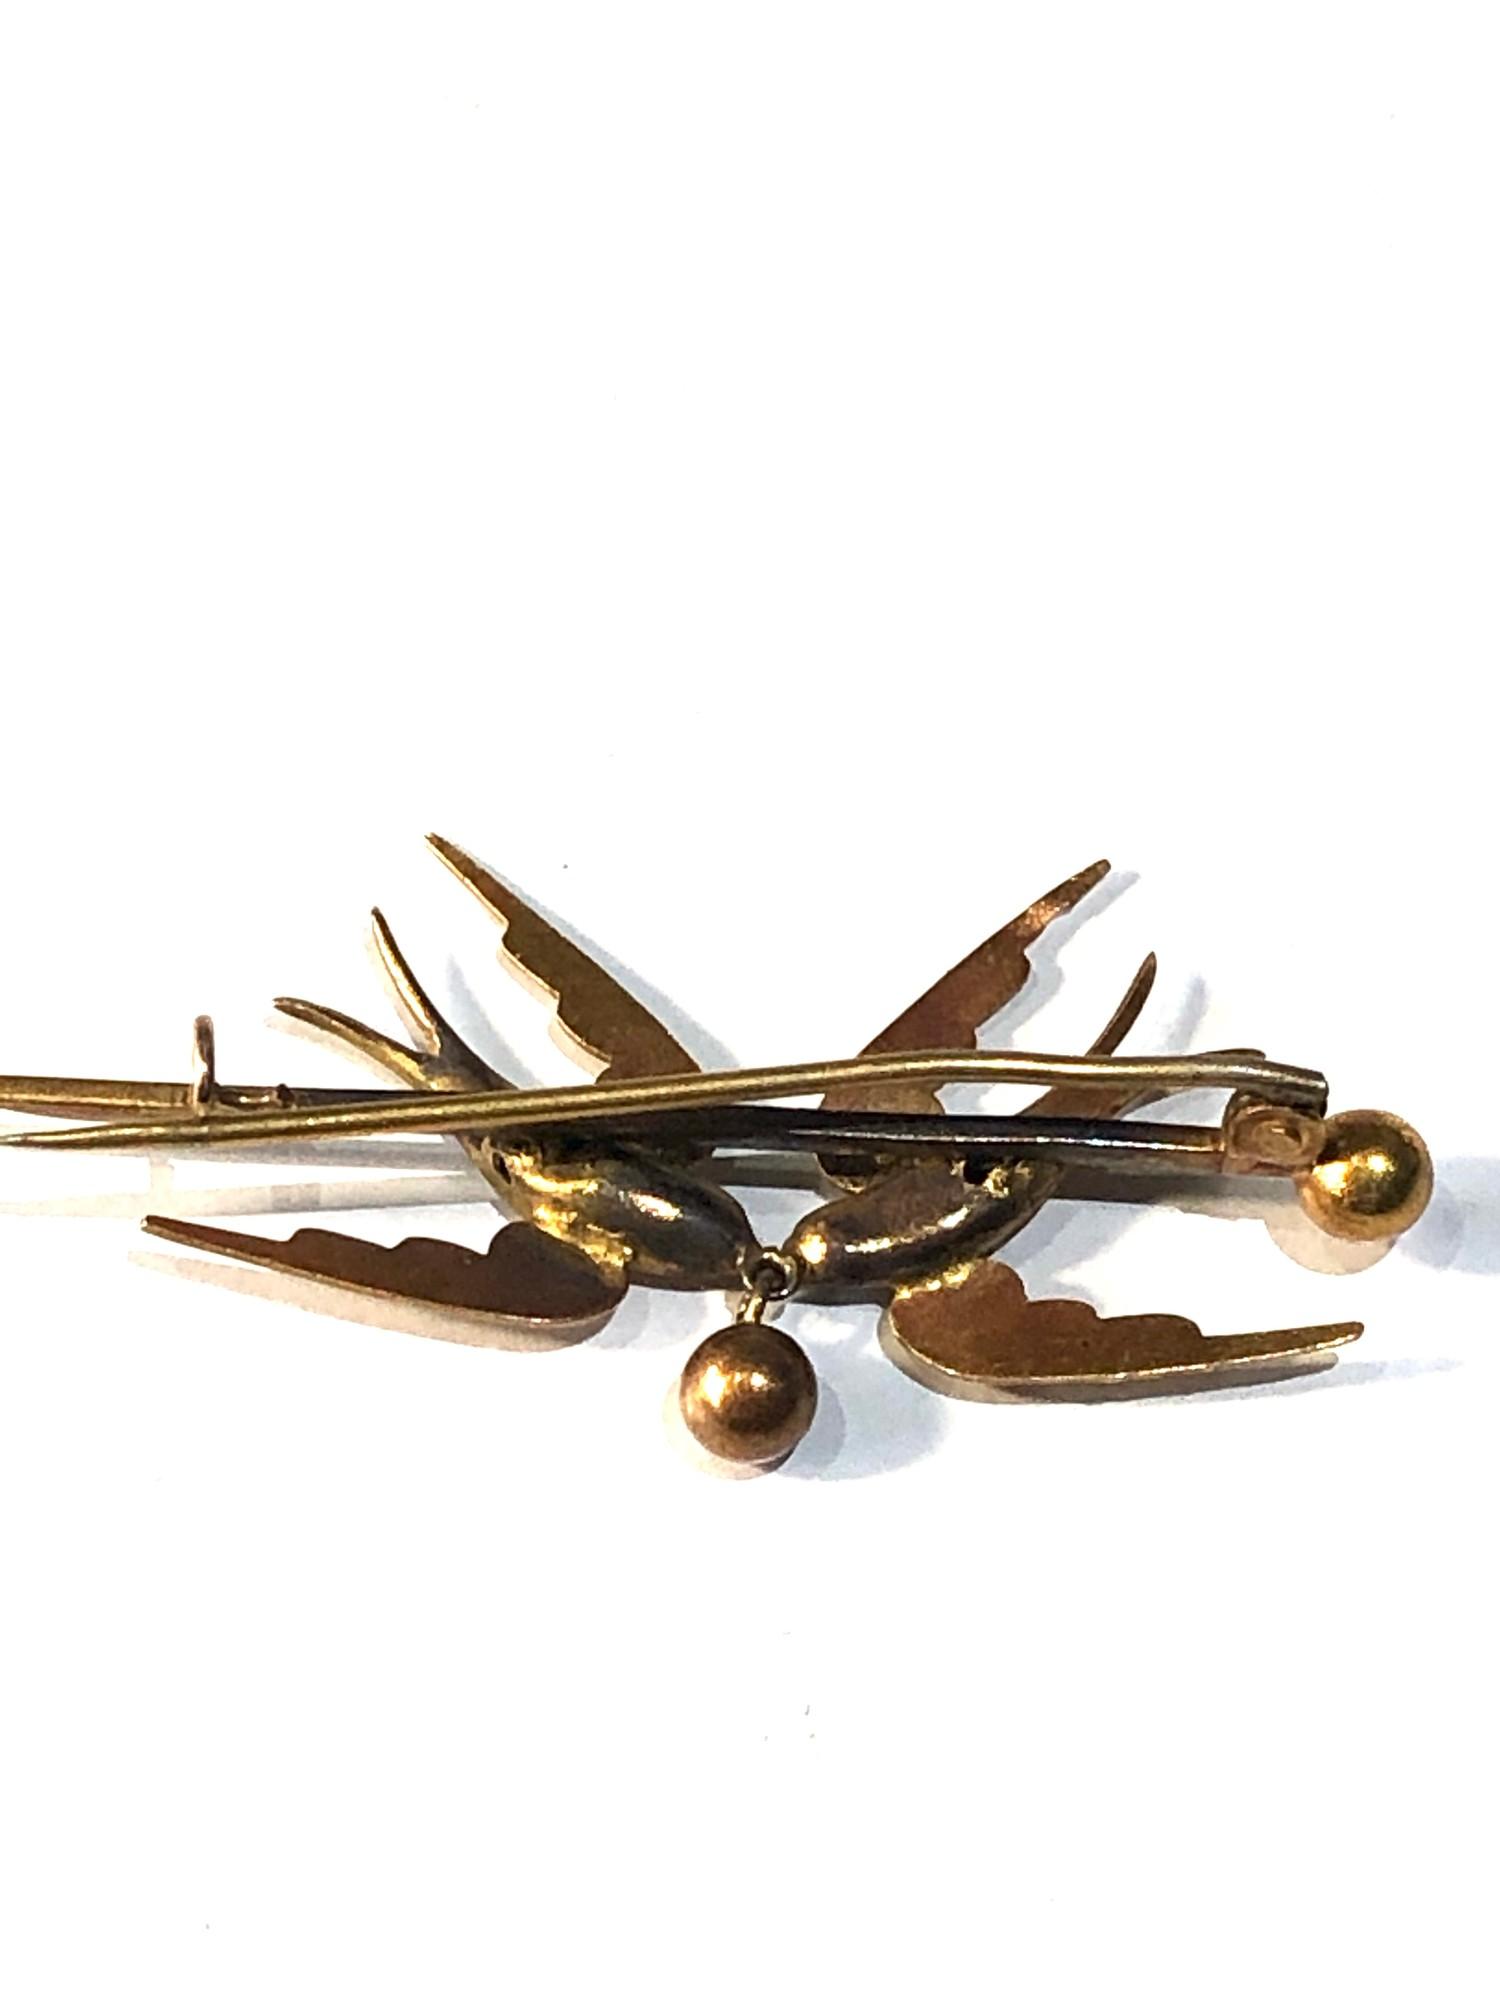 Antique 9ct gold double swallow bar brooch measures approx 5.5cm by 2.2cm weight 4.5g xrt 15ct gold - Image 3 of 3